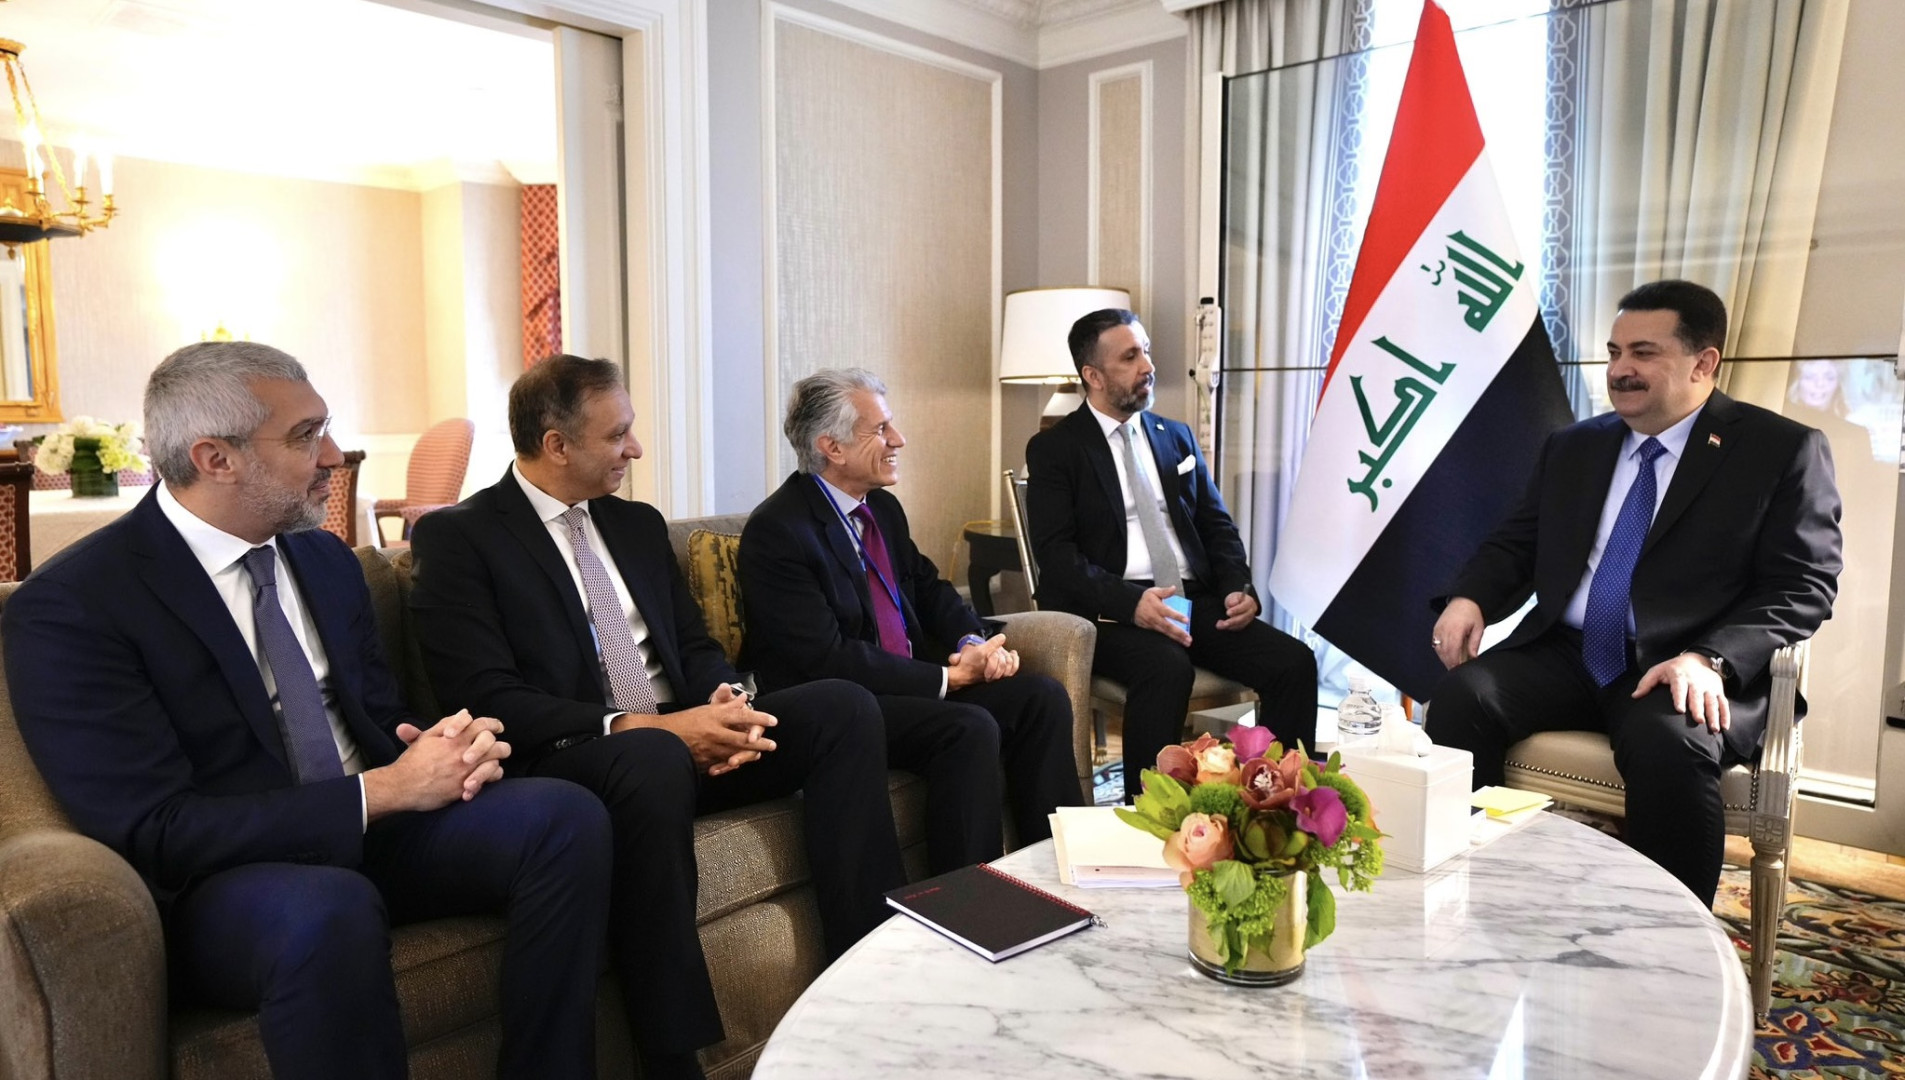 Iraqi PM discusses banking reforms with J.P. Morgan's global head in Washington meeting